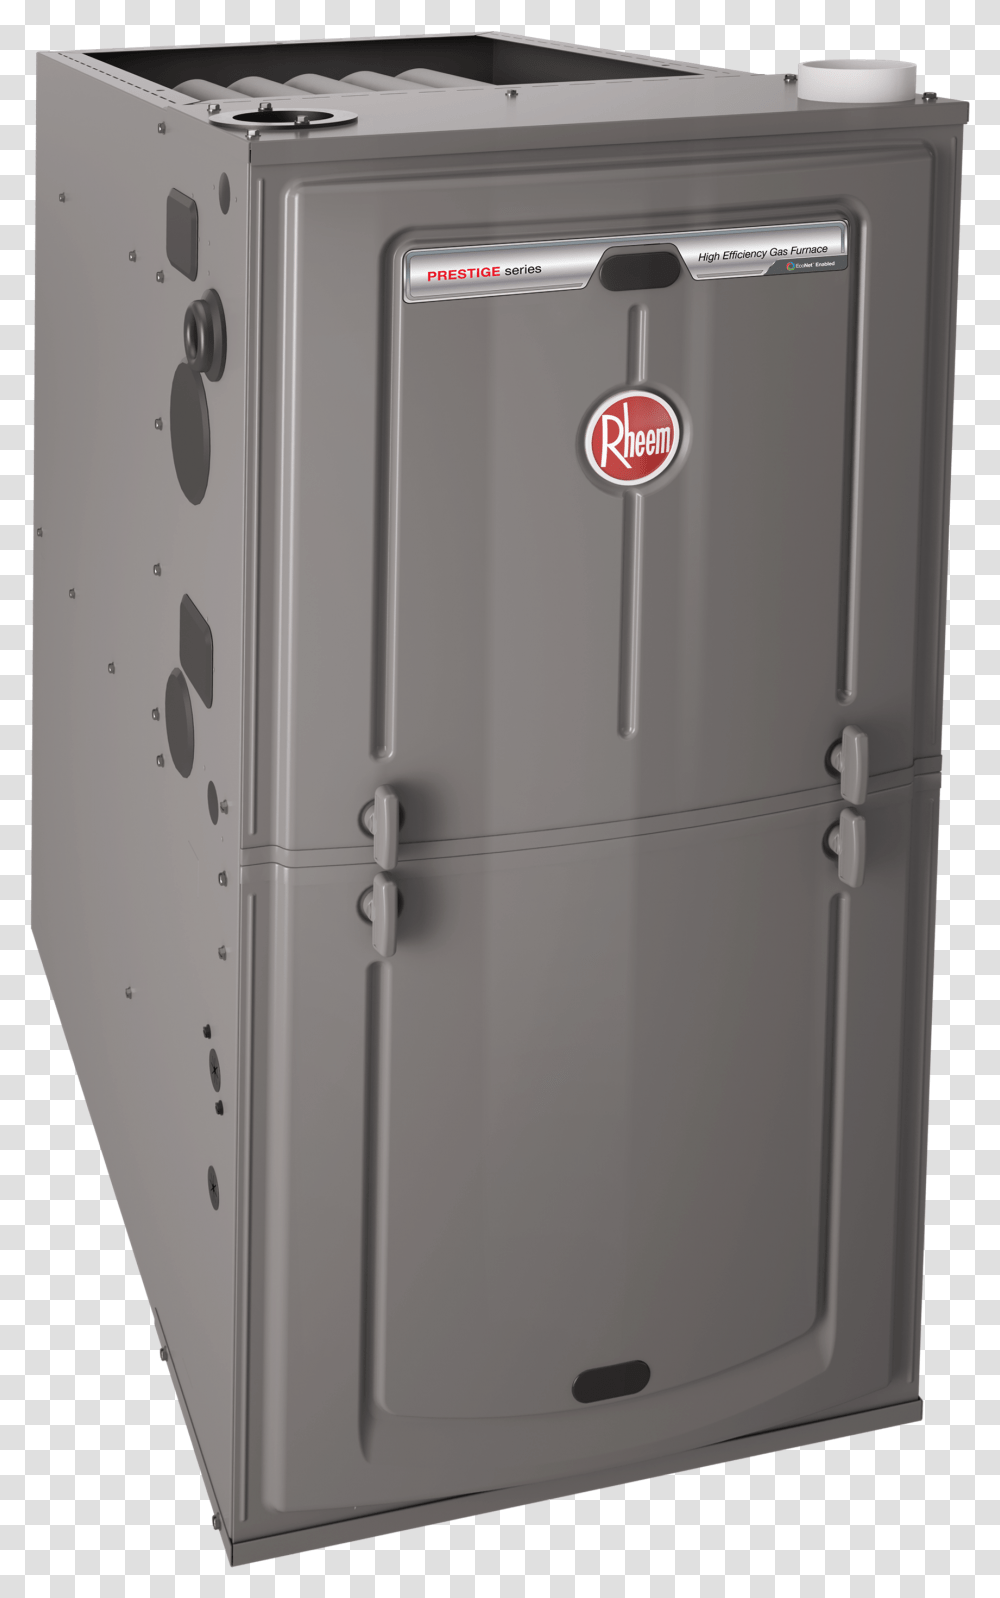 Rheem Gas Furnace Is Your Furnace Ready For Winter, Luggage, Refrigerator, Appliance, Suitcase Transparent Png